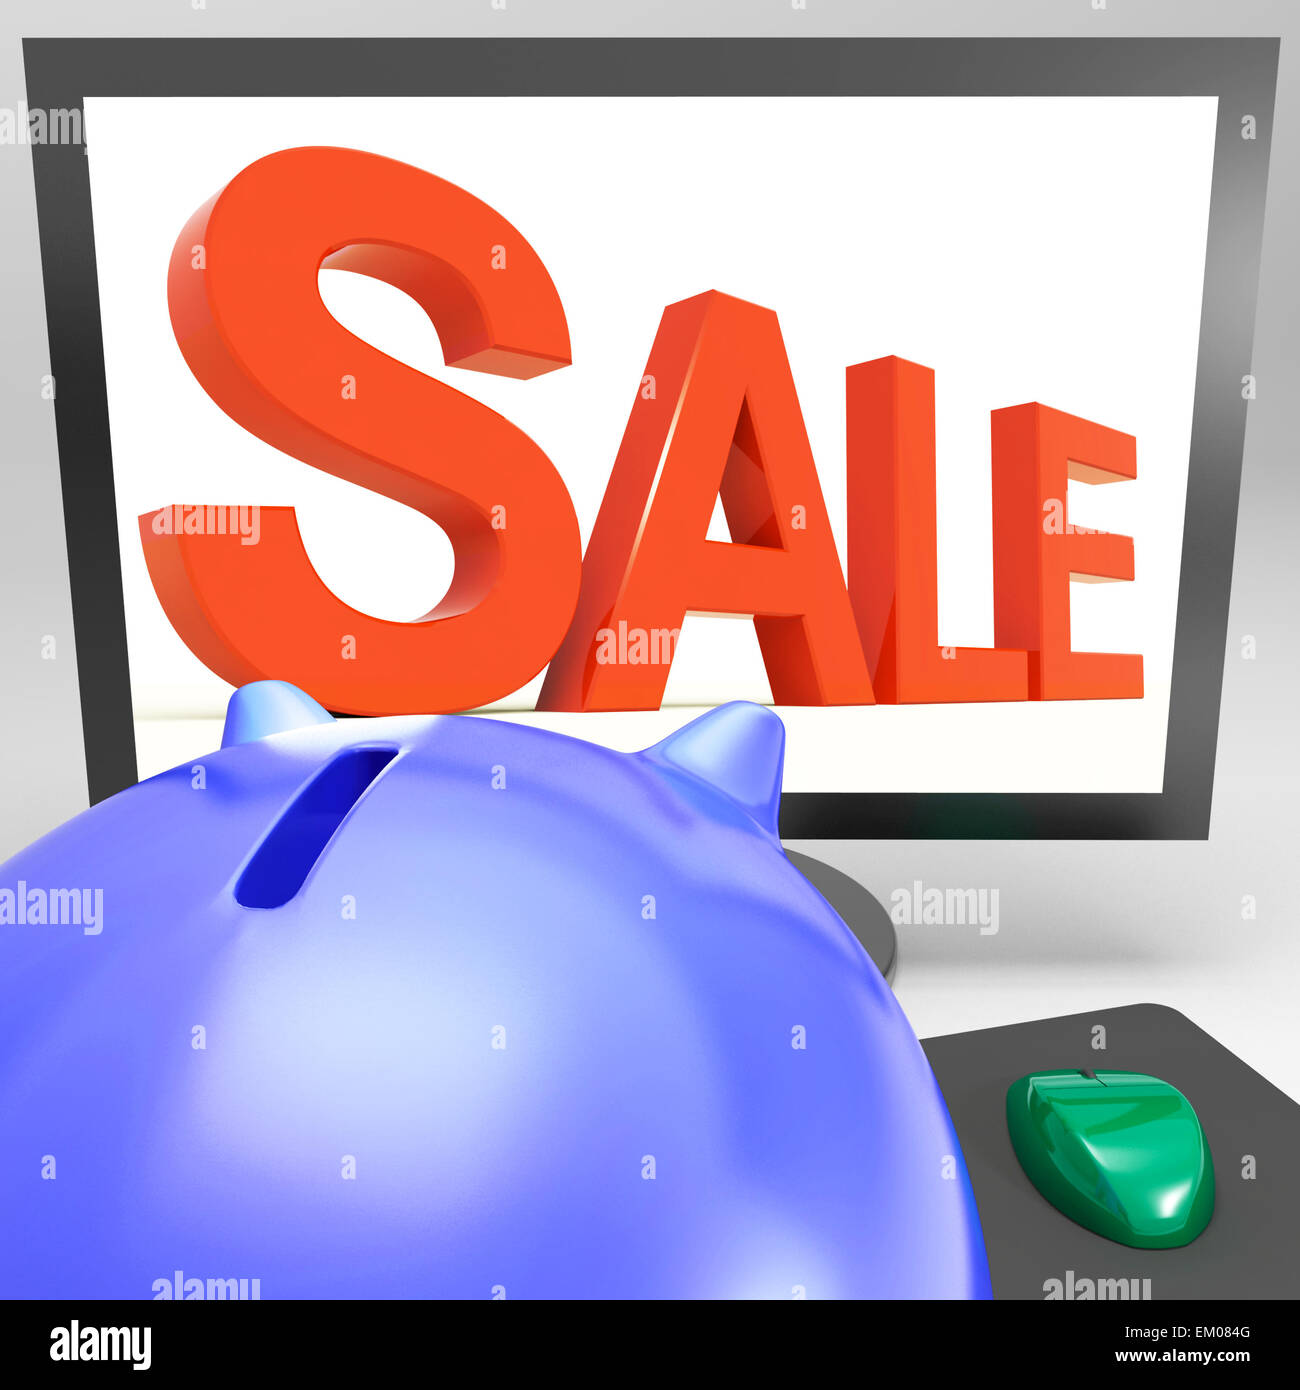 Sale On Monitor Shows Promotional Prices Stock Photo